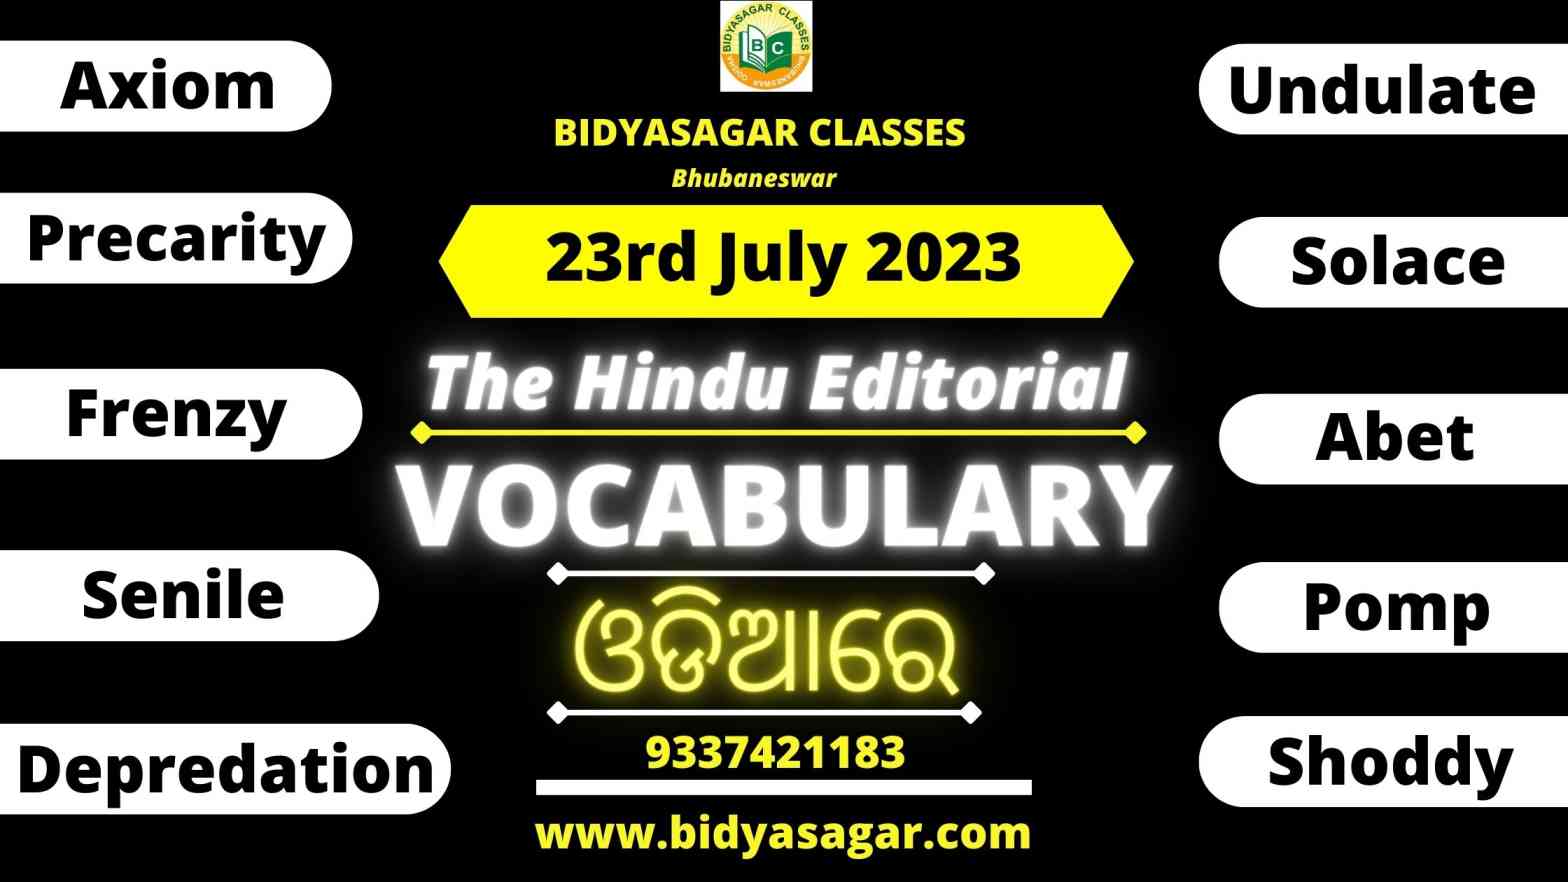 The Hindu Editorial Vocabulary of 23rd July 2023The Hindu Editorial Vocabulary of 23rd July 2023